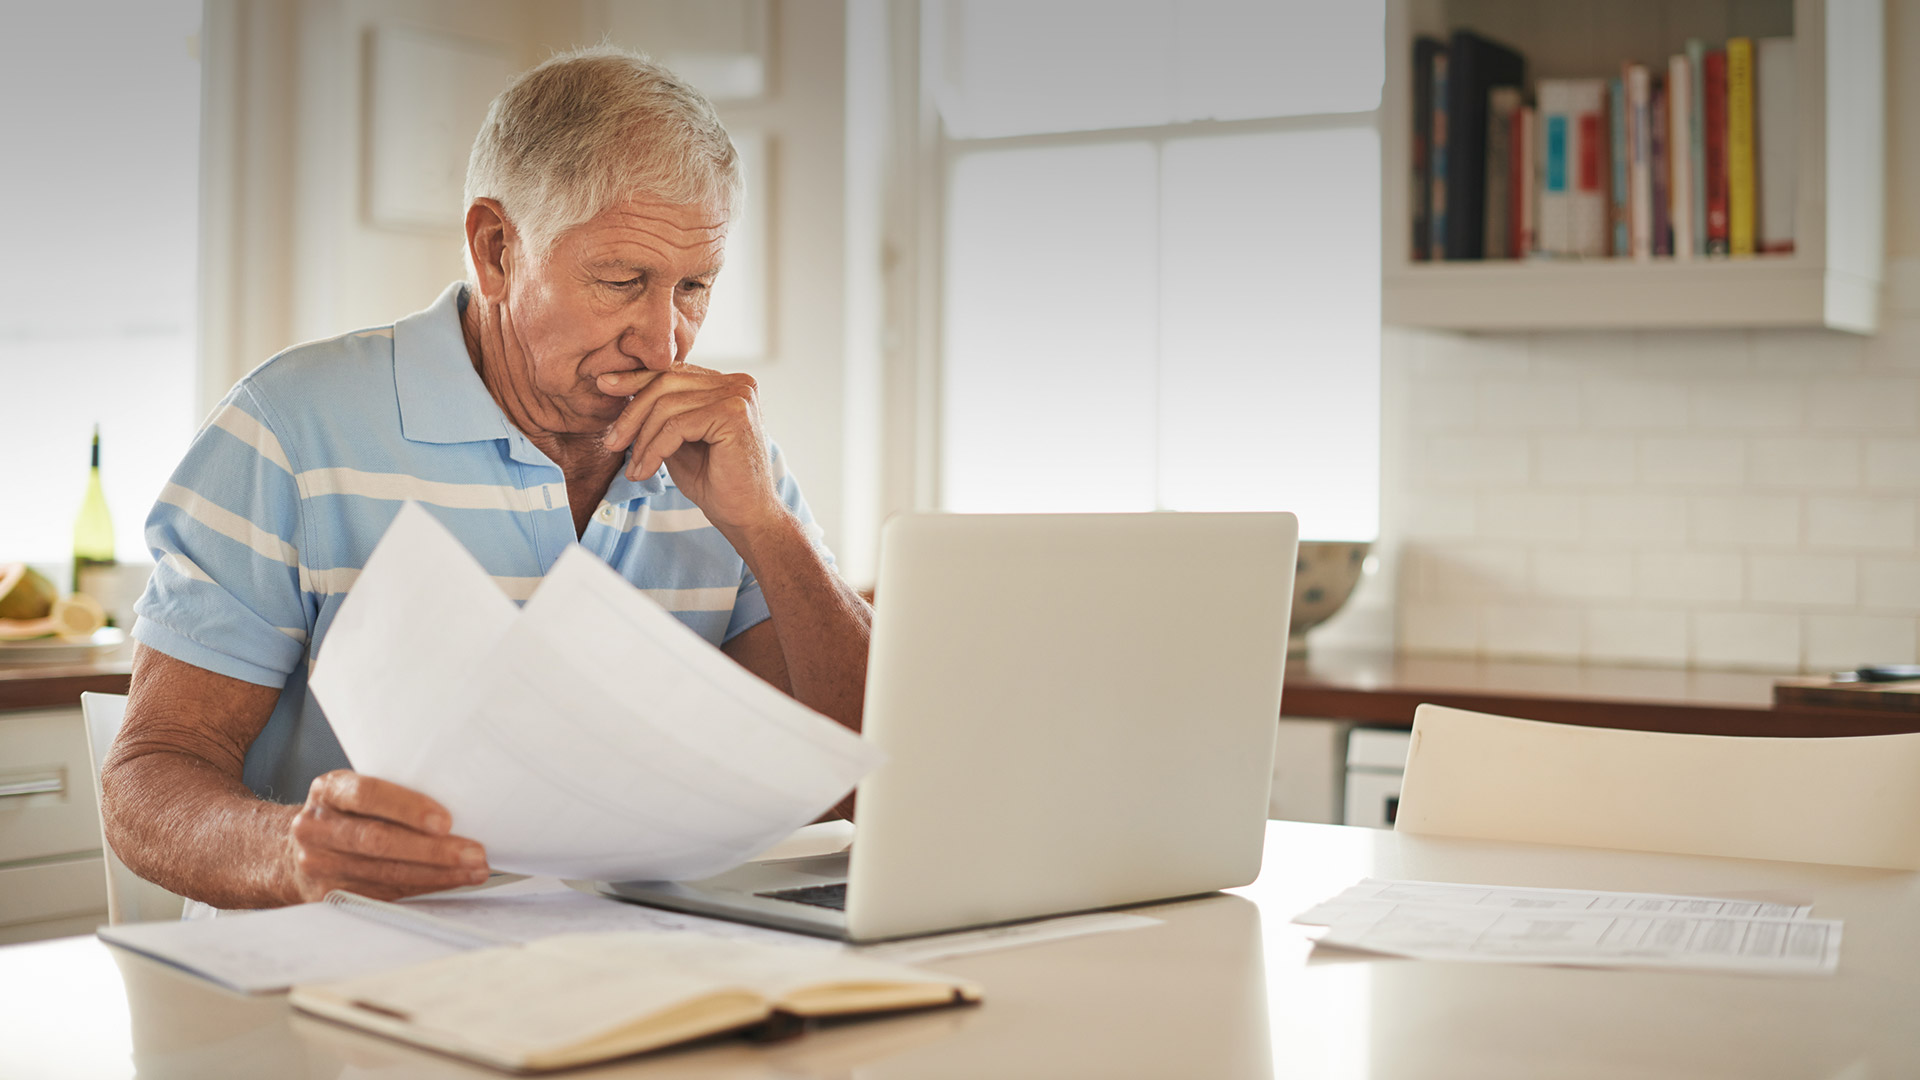 Elderly man staying up to date and following guidance from the CDC and your state and local public health departments.